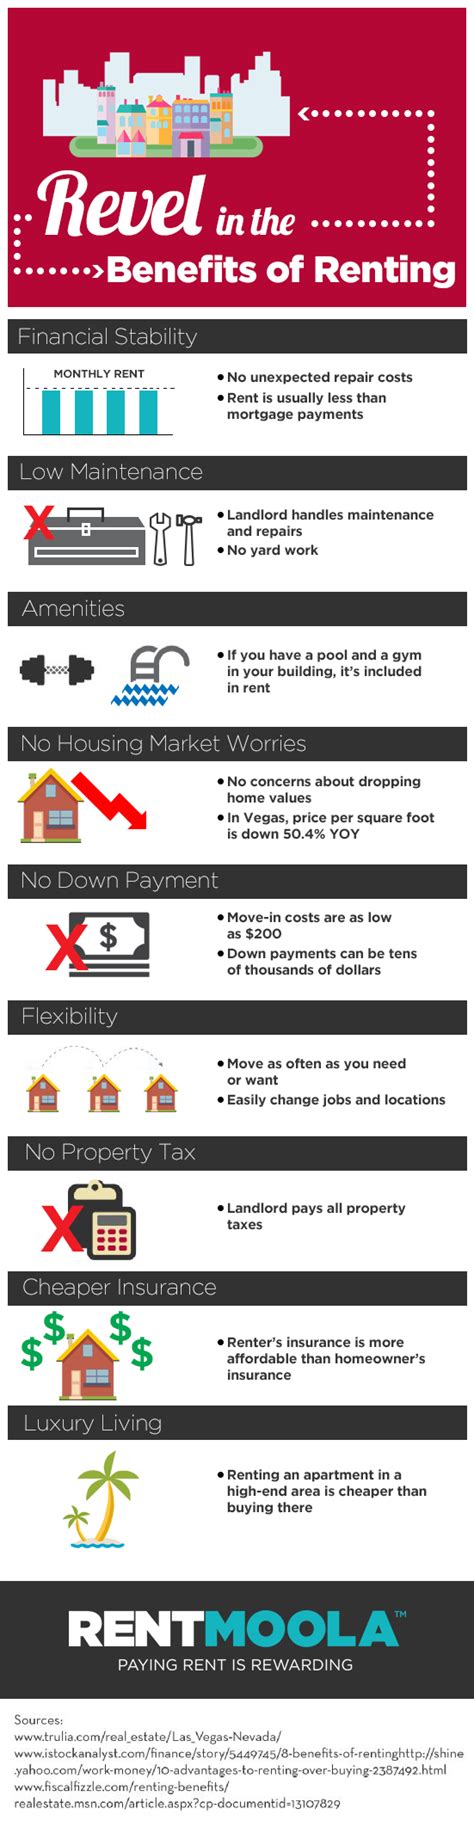 Purchasing renters insurance is always a good idea, whether you can afford to cover unexpected expenses or not. Infographic: The benefits of renting. | Renters insurance ...